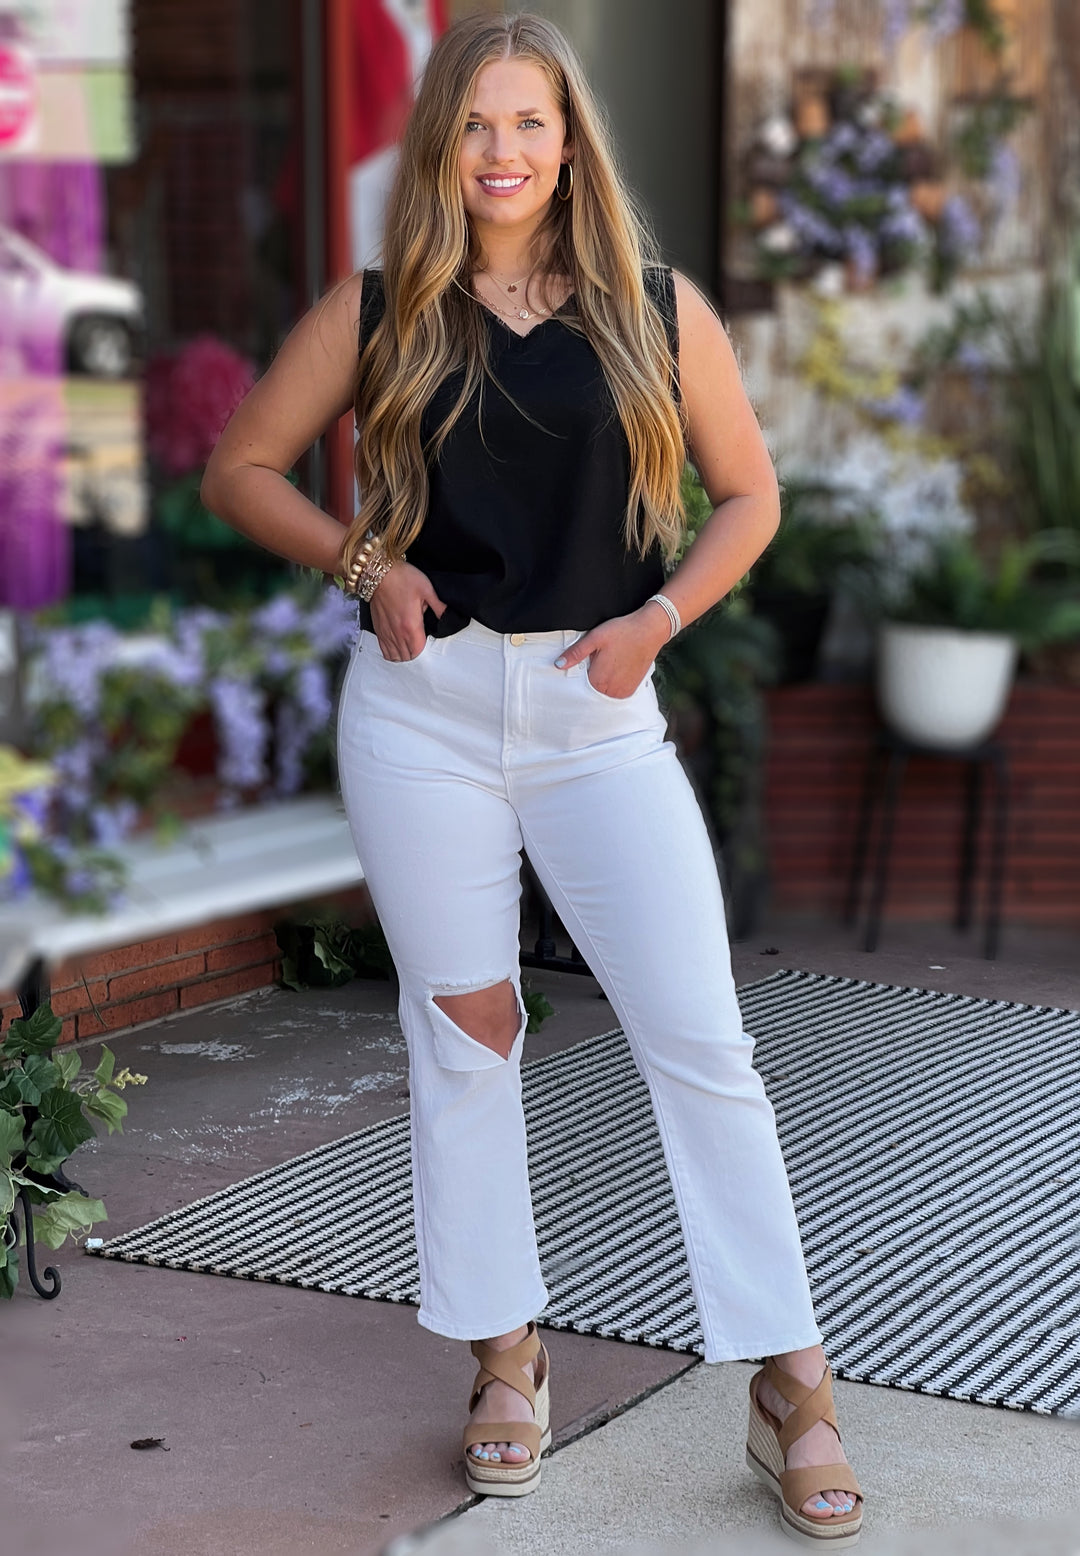 Chrissy Relaxed Distressed White Jeans